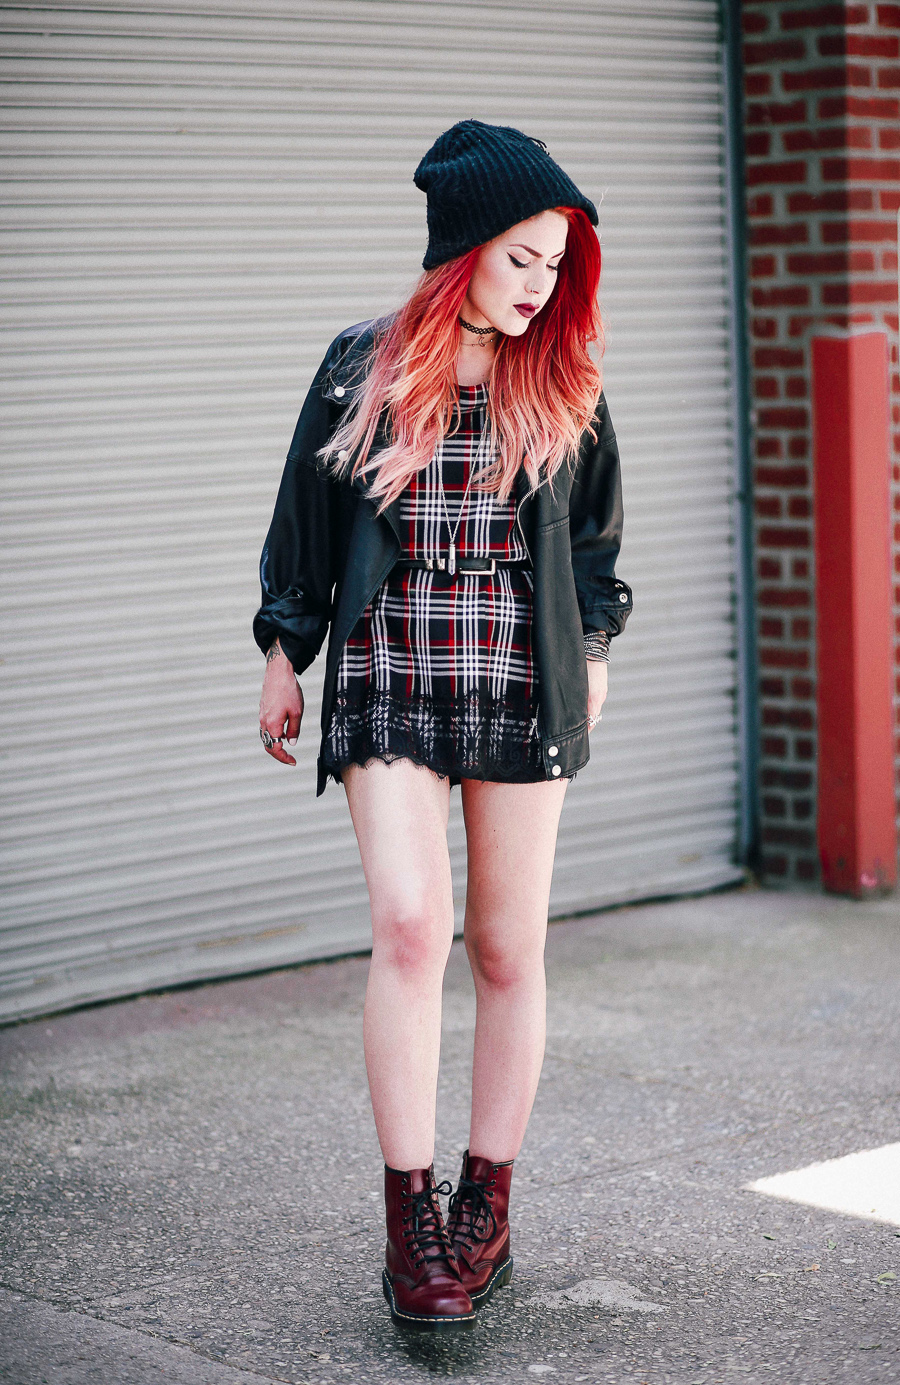 Le Happy wearing Aeneas Erlking plaid dress and red docs